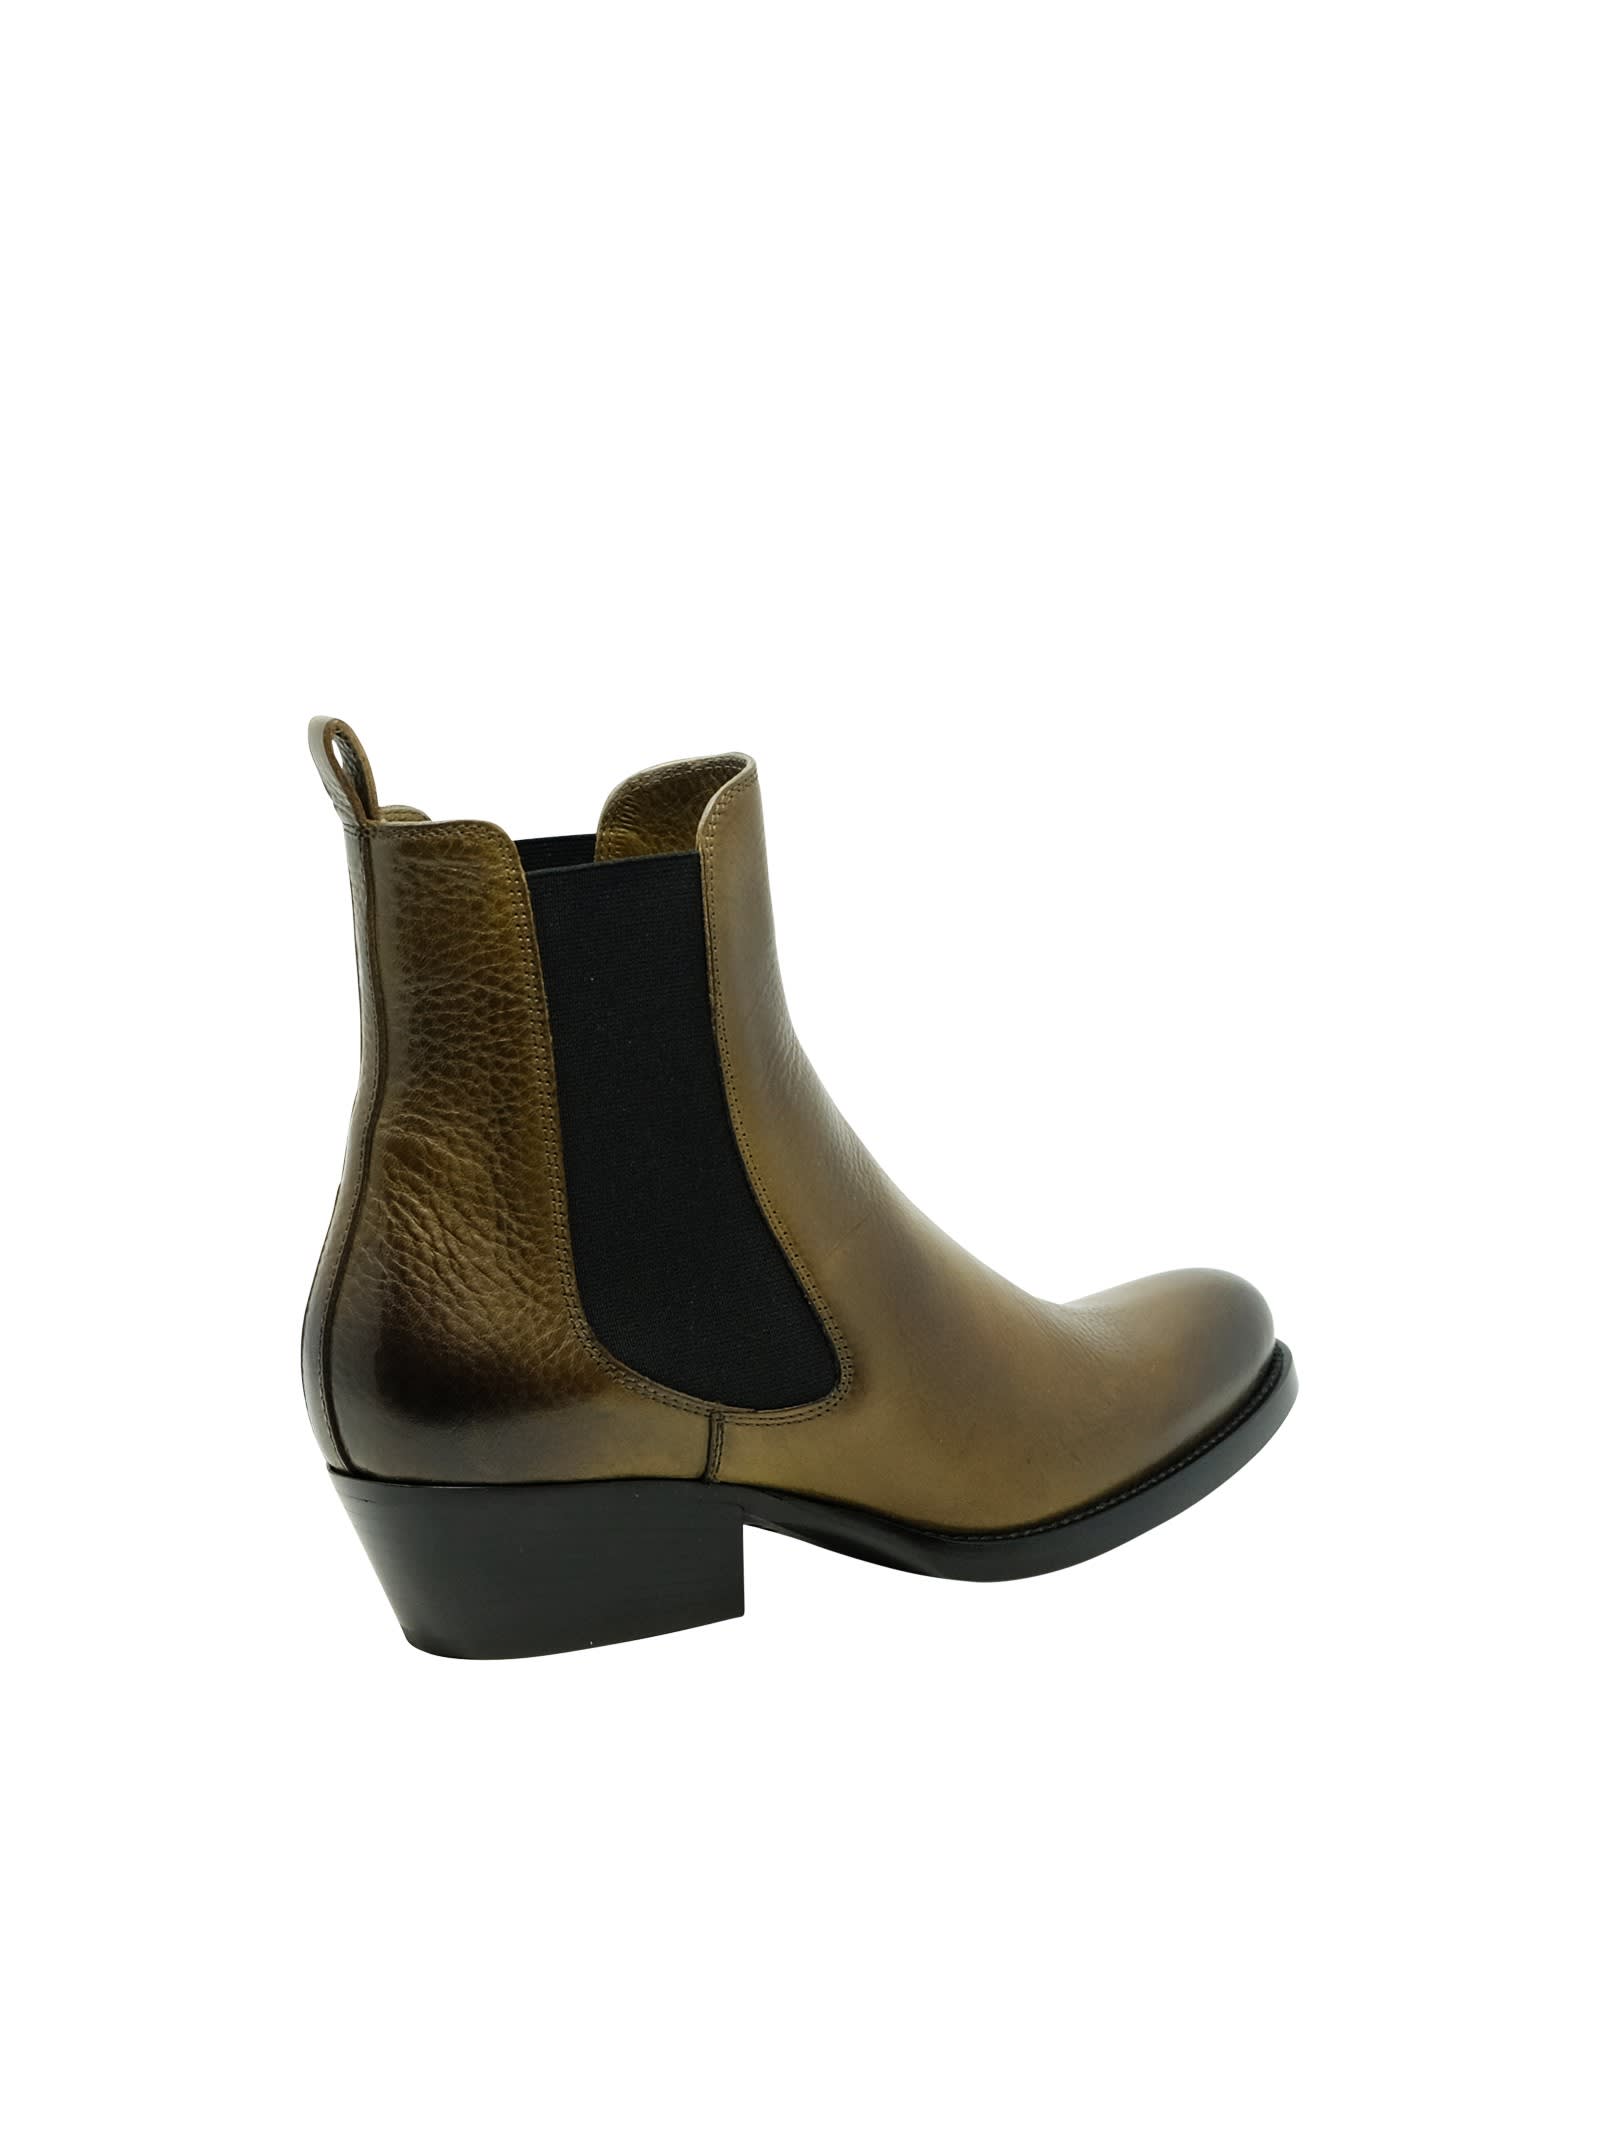 Shop Sartore Sr421001 Toscano Green Olive Leather Ankle Boots